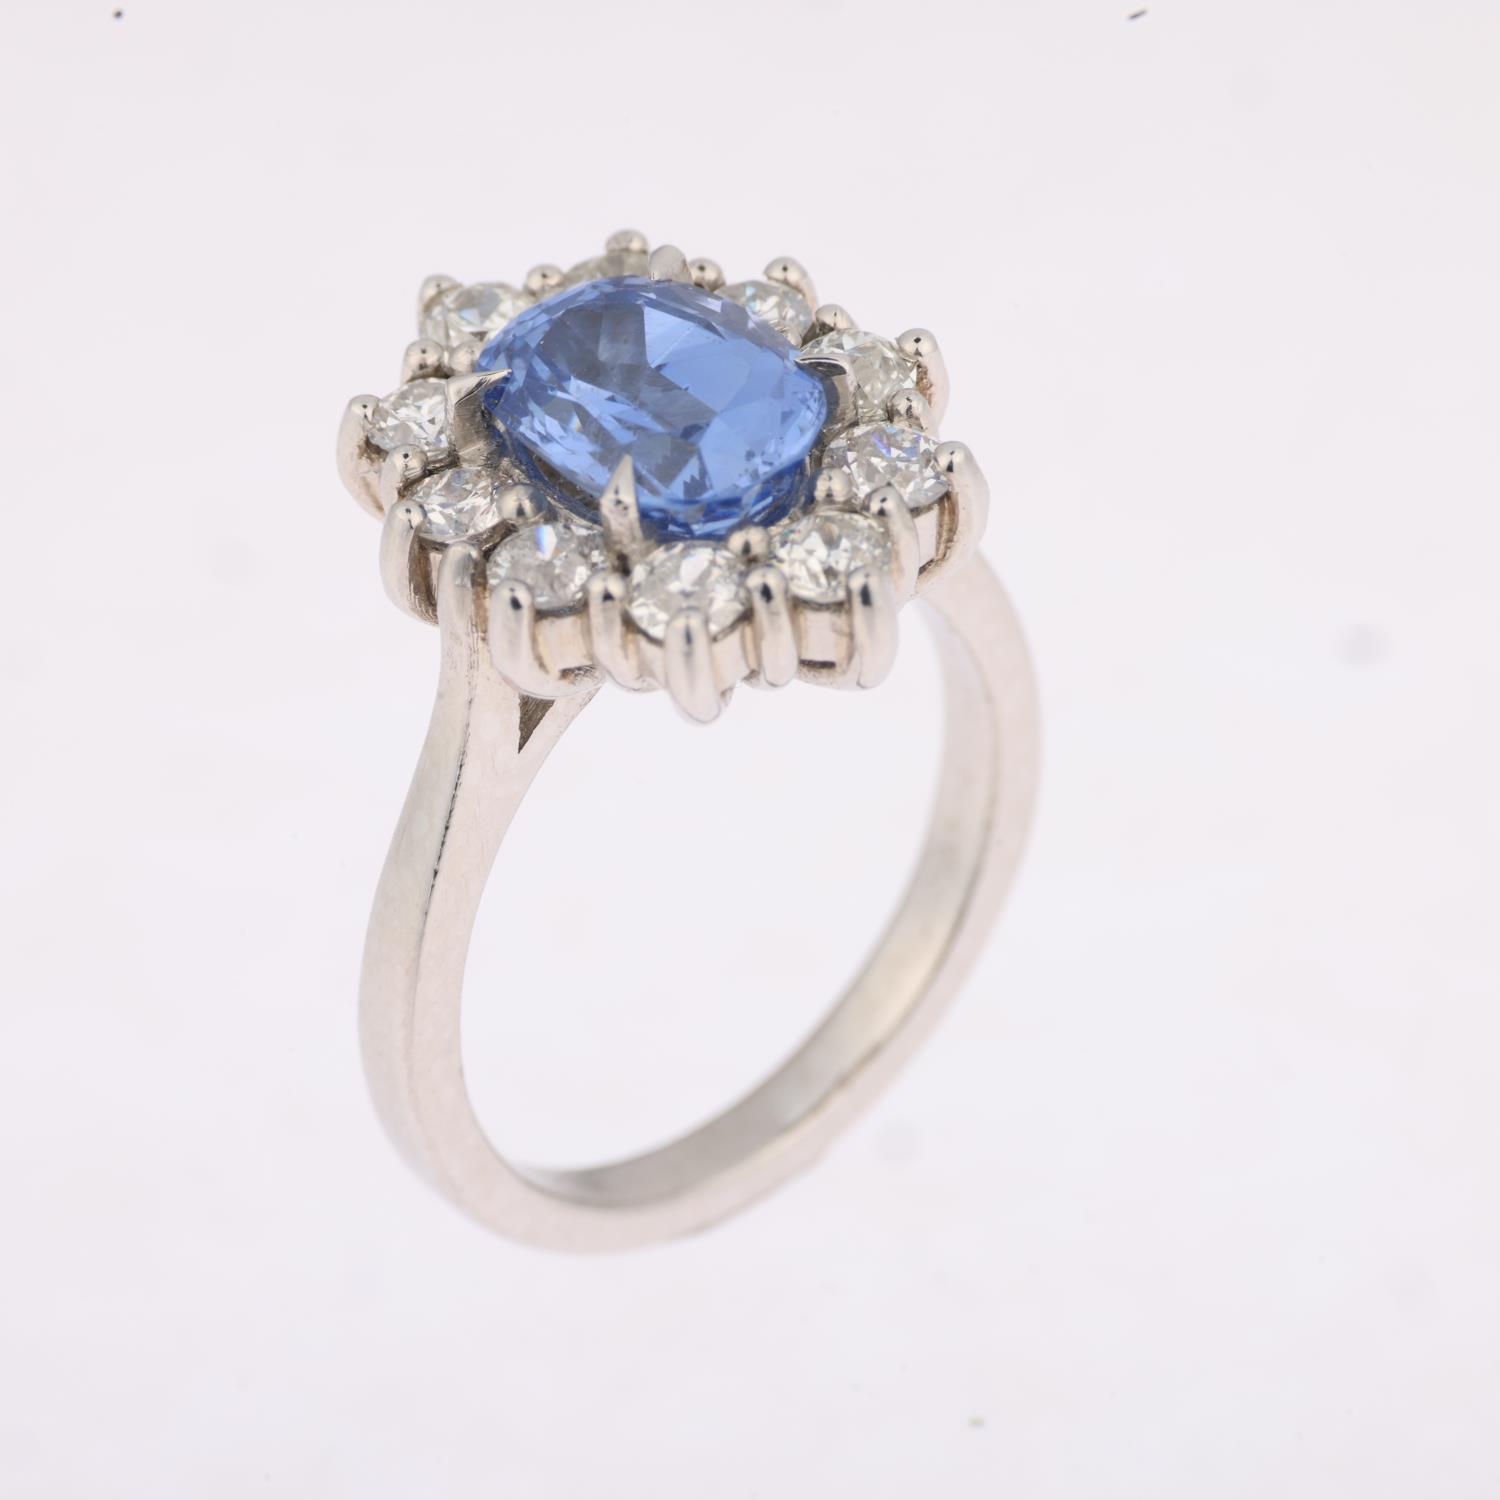 A Sri Lankan 'No Heat' sapphire and diamond oval cluster ring, centrally claw set with 2.44ct oval - Image 2 of 4